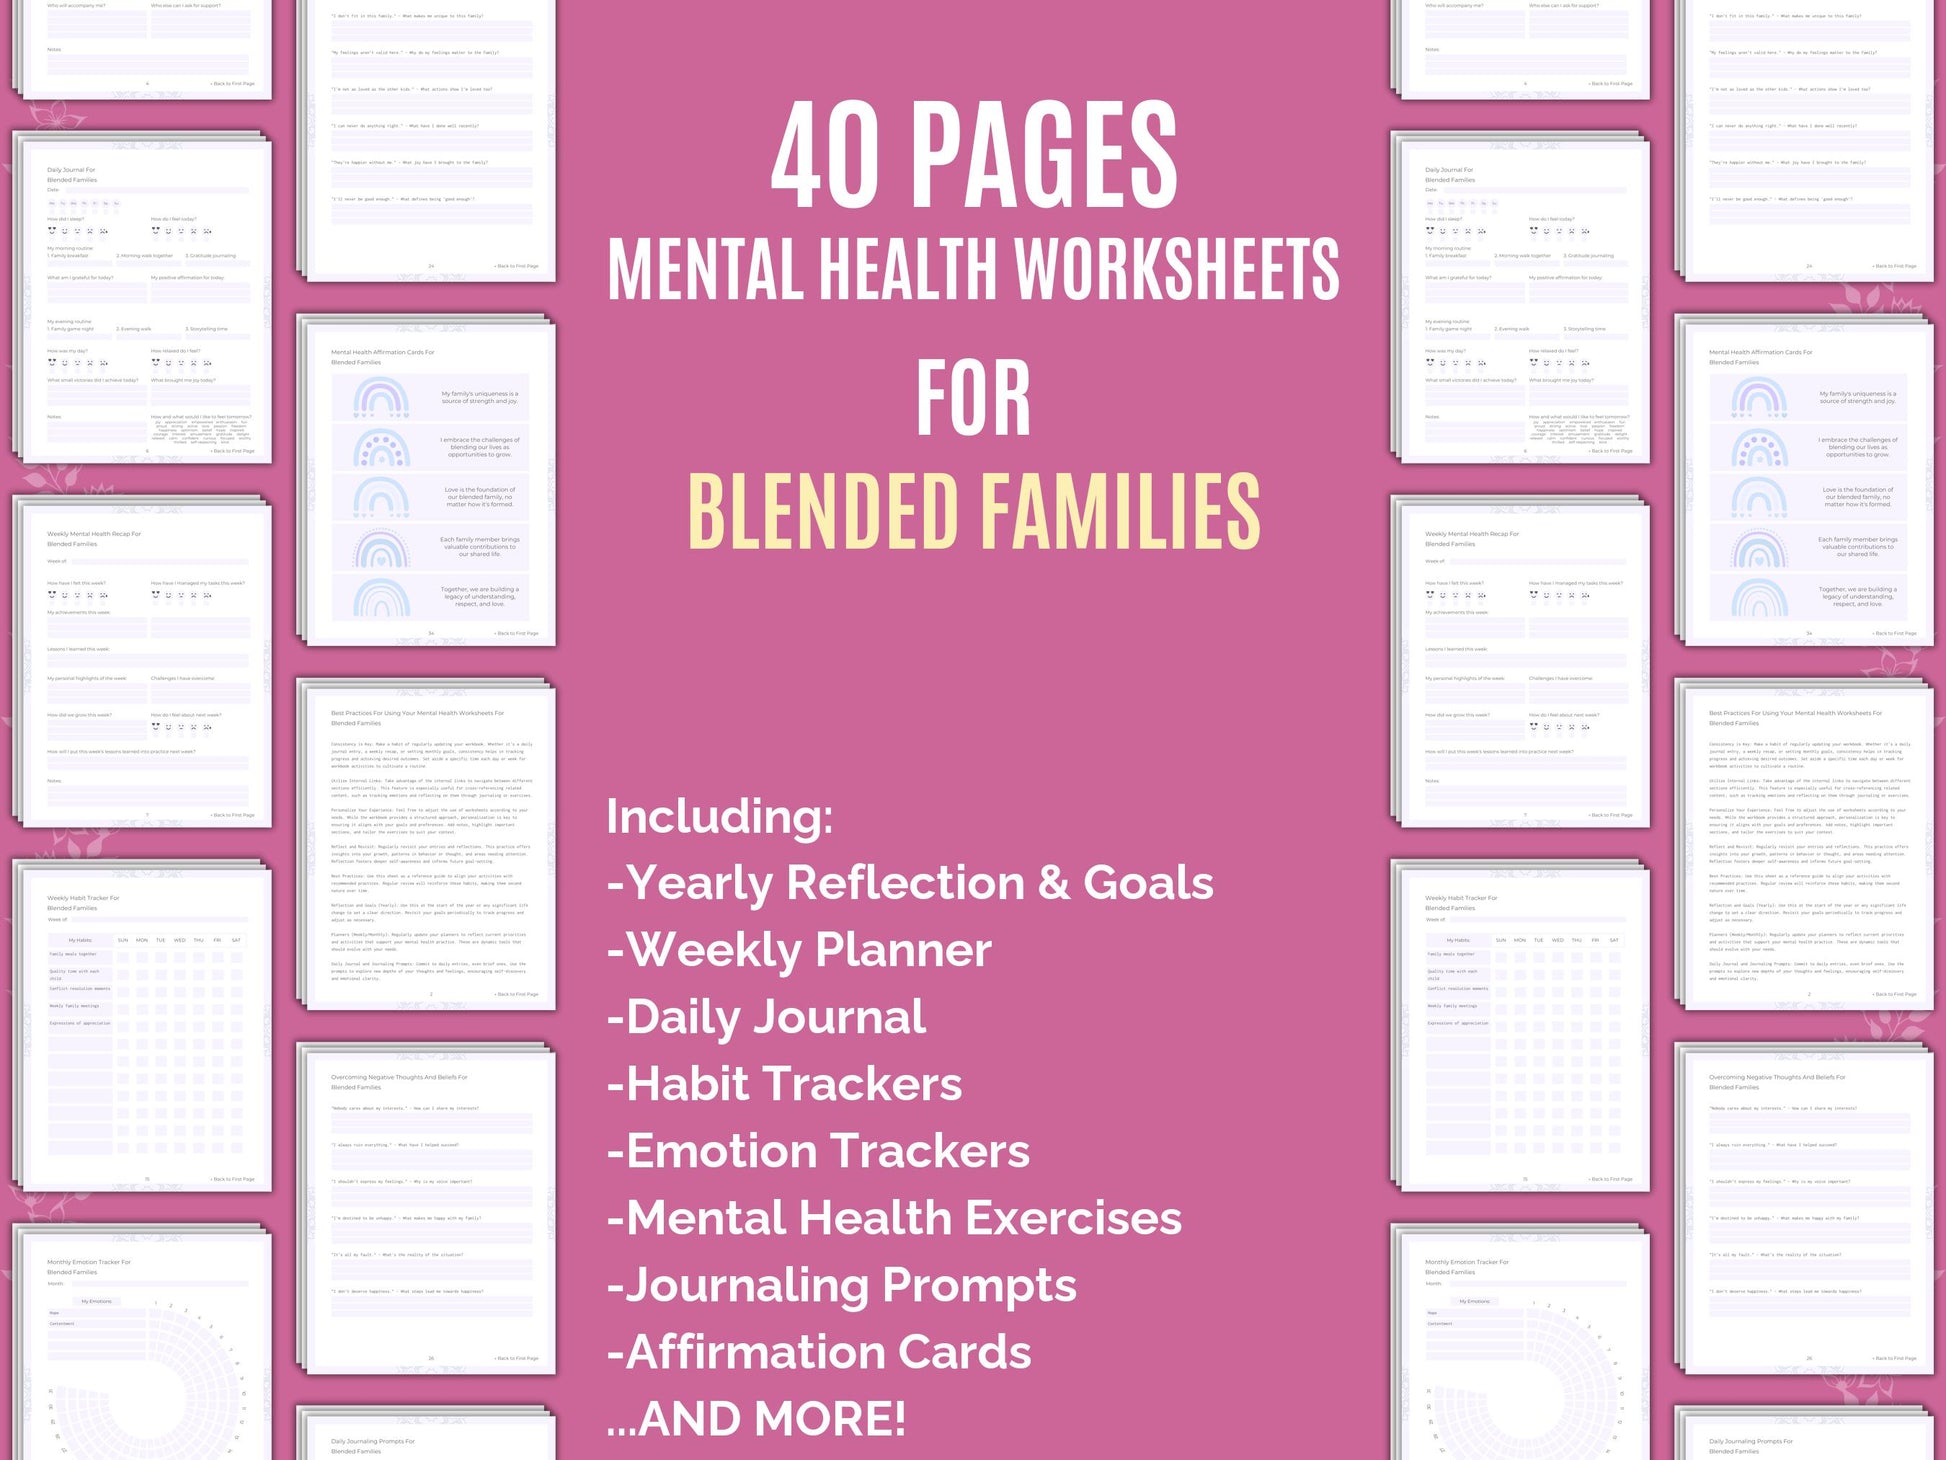 Resources, Therapy, Planners, Blended Families Mental Health, Counseling, Templates, Tools, Workbooks, Notes, Journals, Journaling, Cheat Sheet, Goal Setting